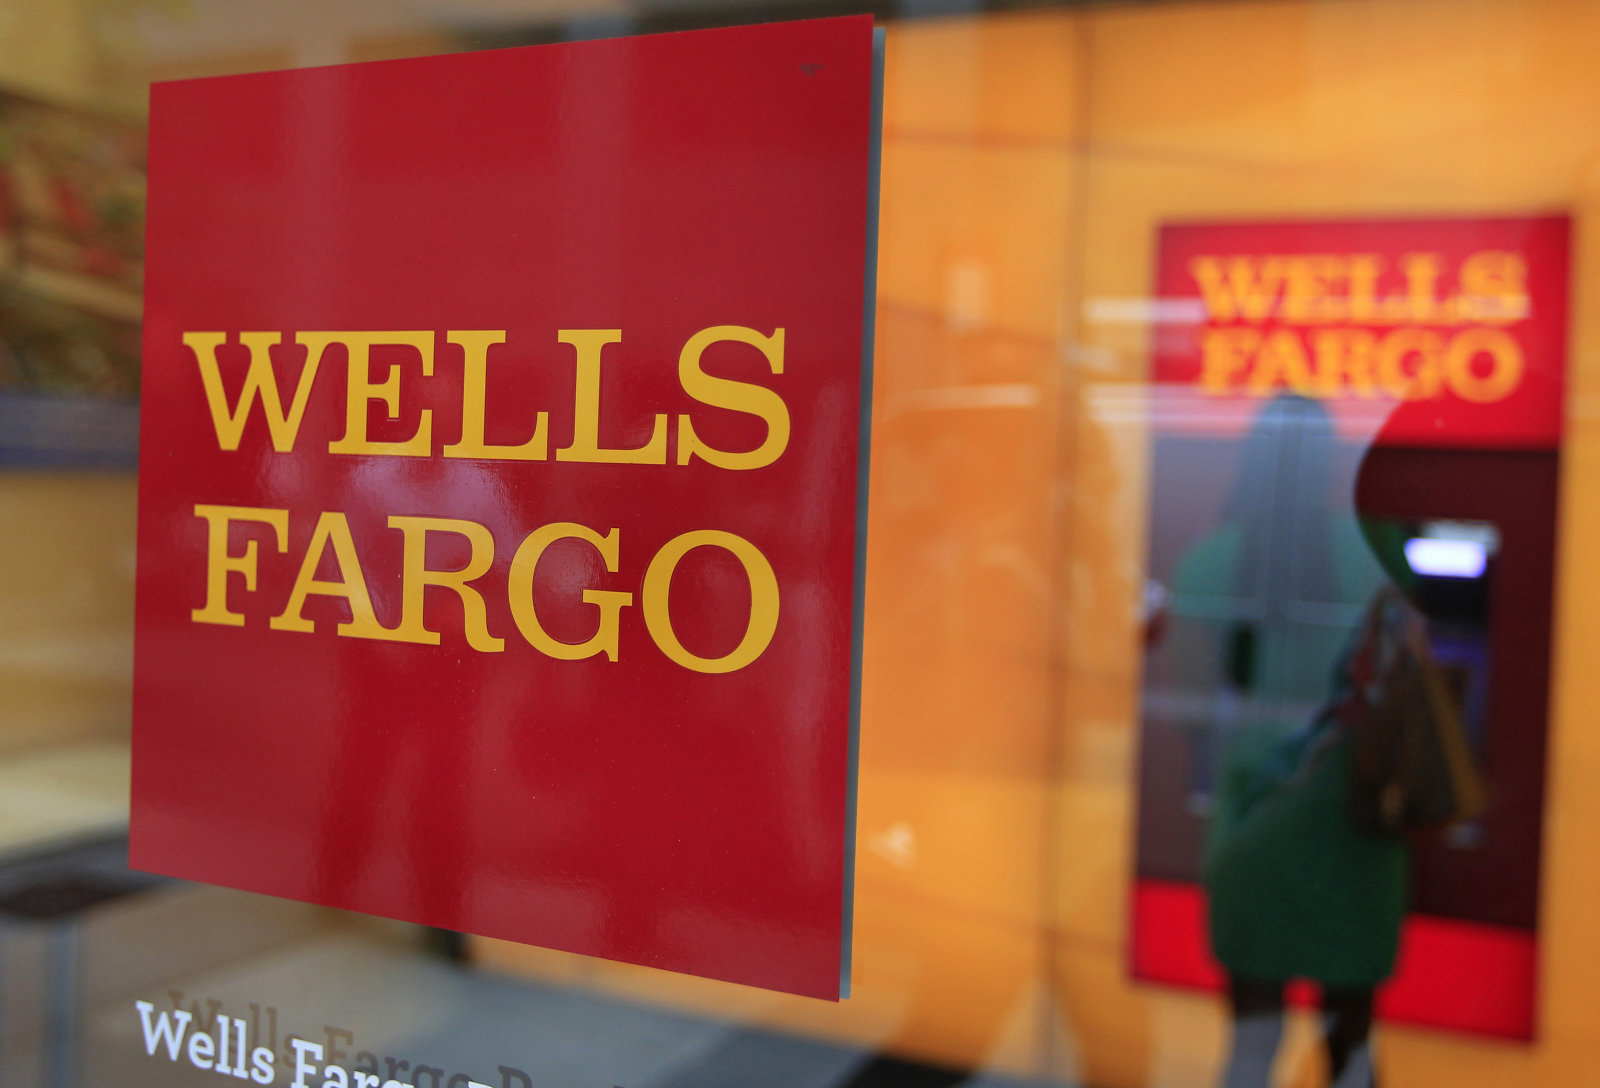 No Bitcoin Can Be Bought Via Wells Fargo Credit Cards